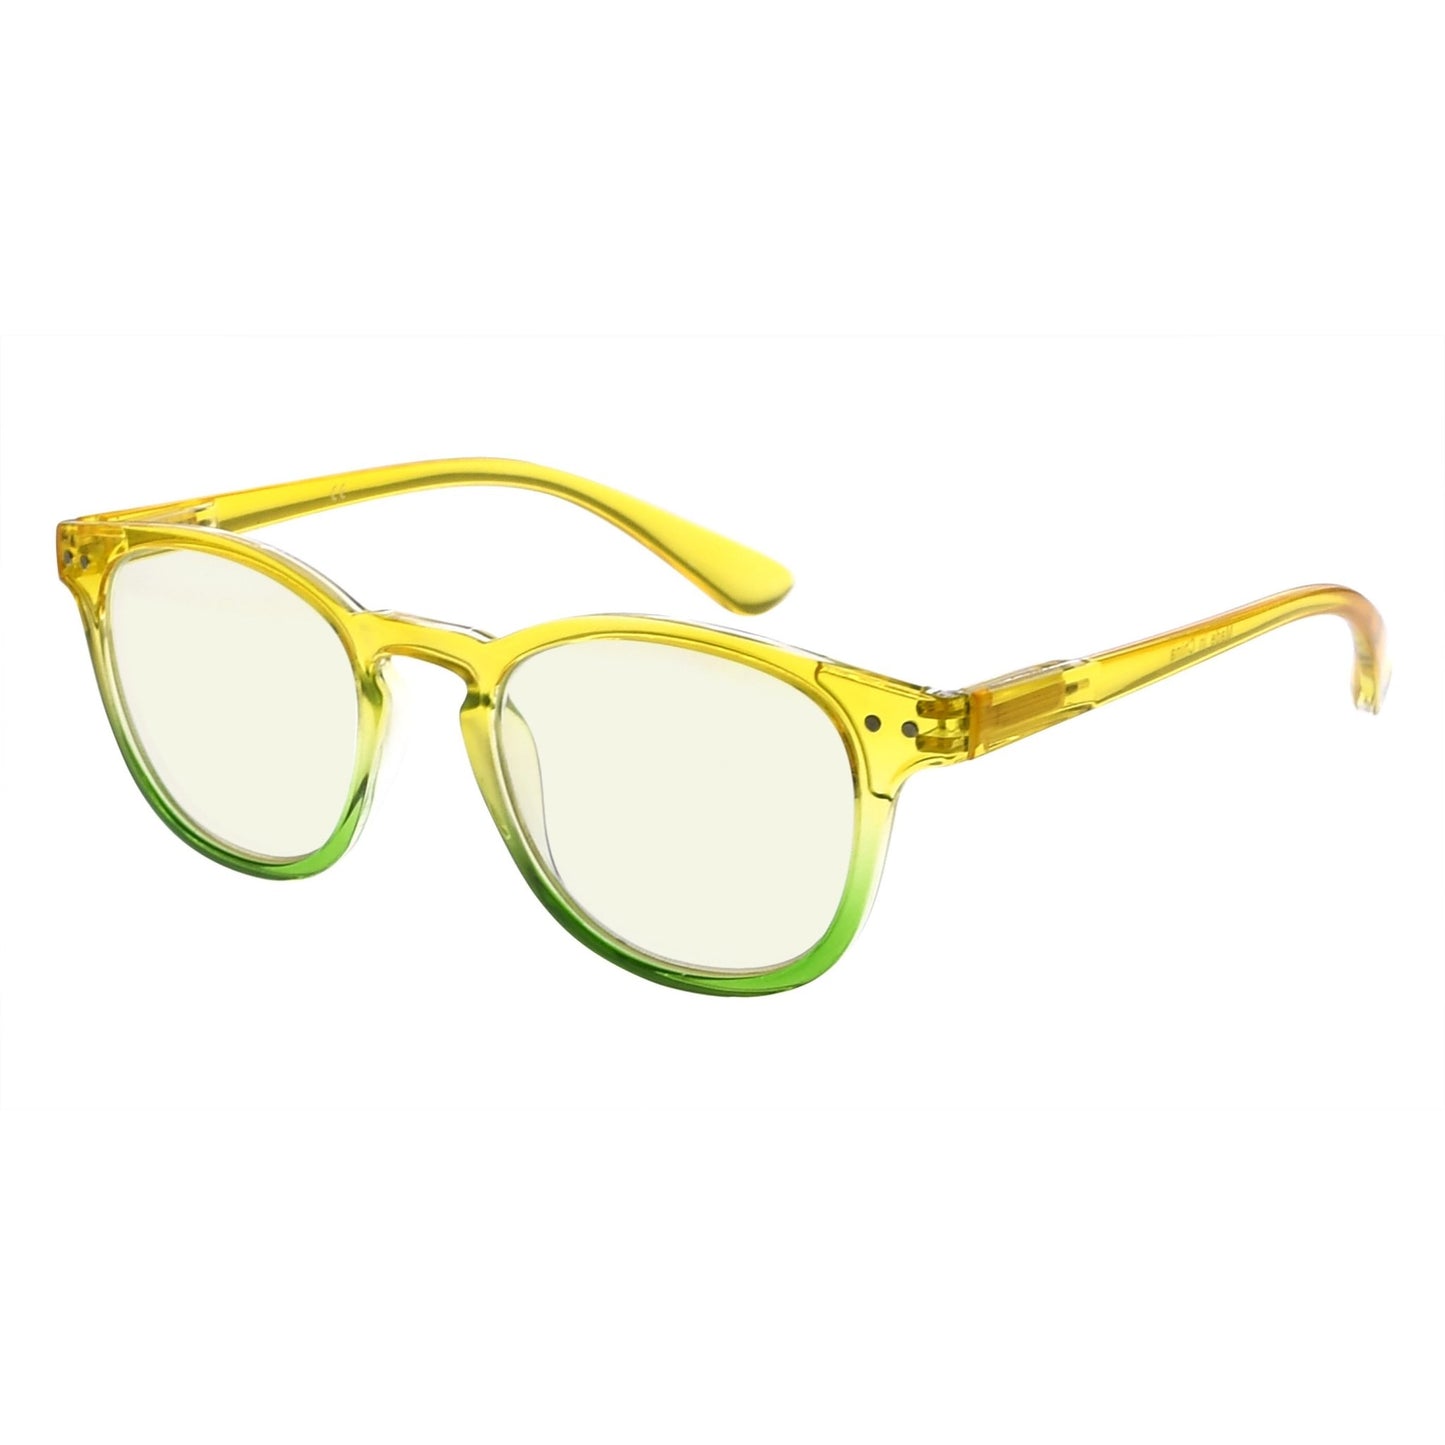 Oval Computer Reading Glasses Yellow CG144